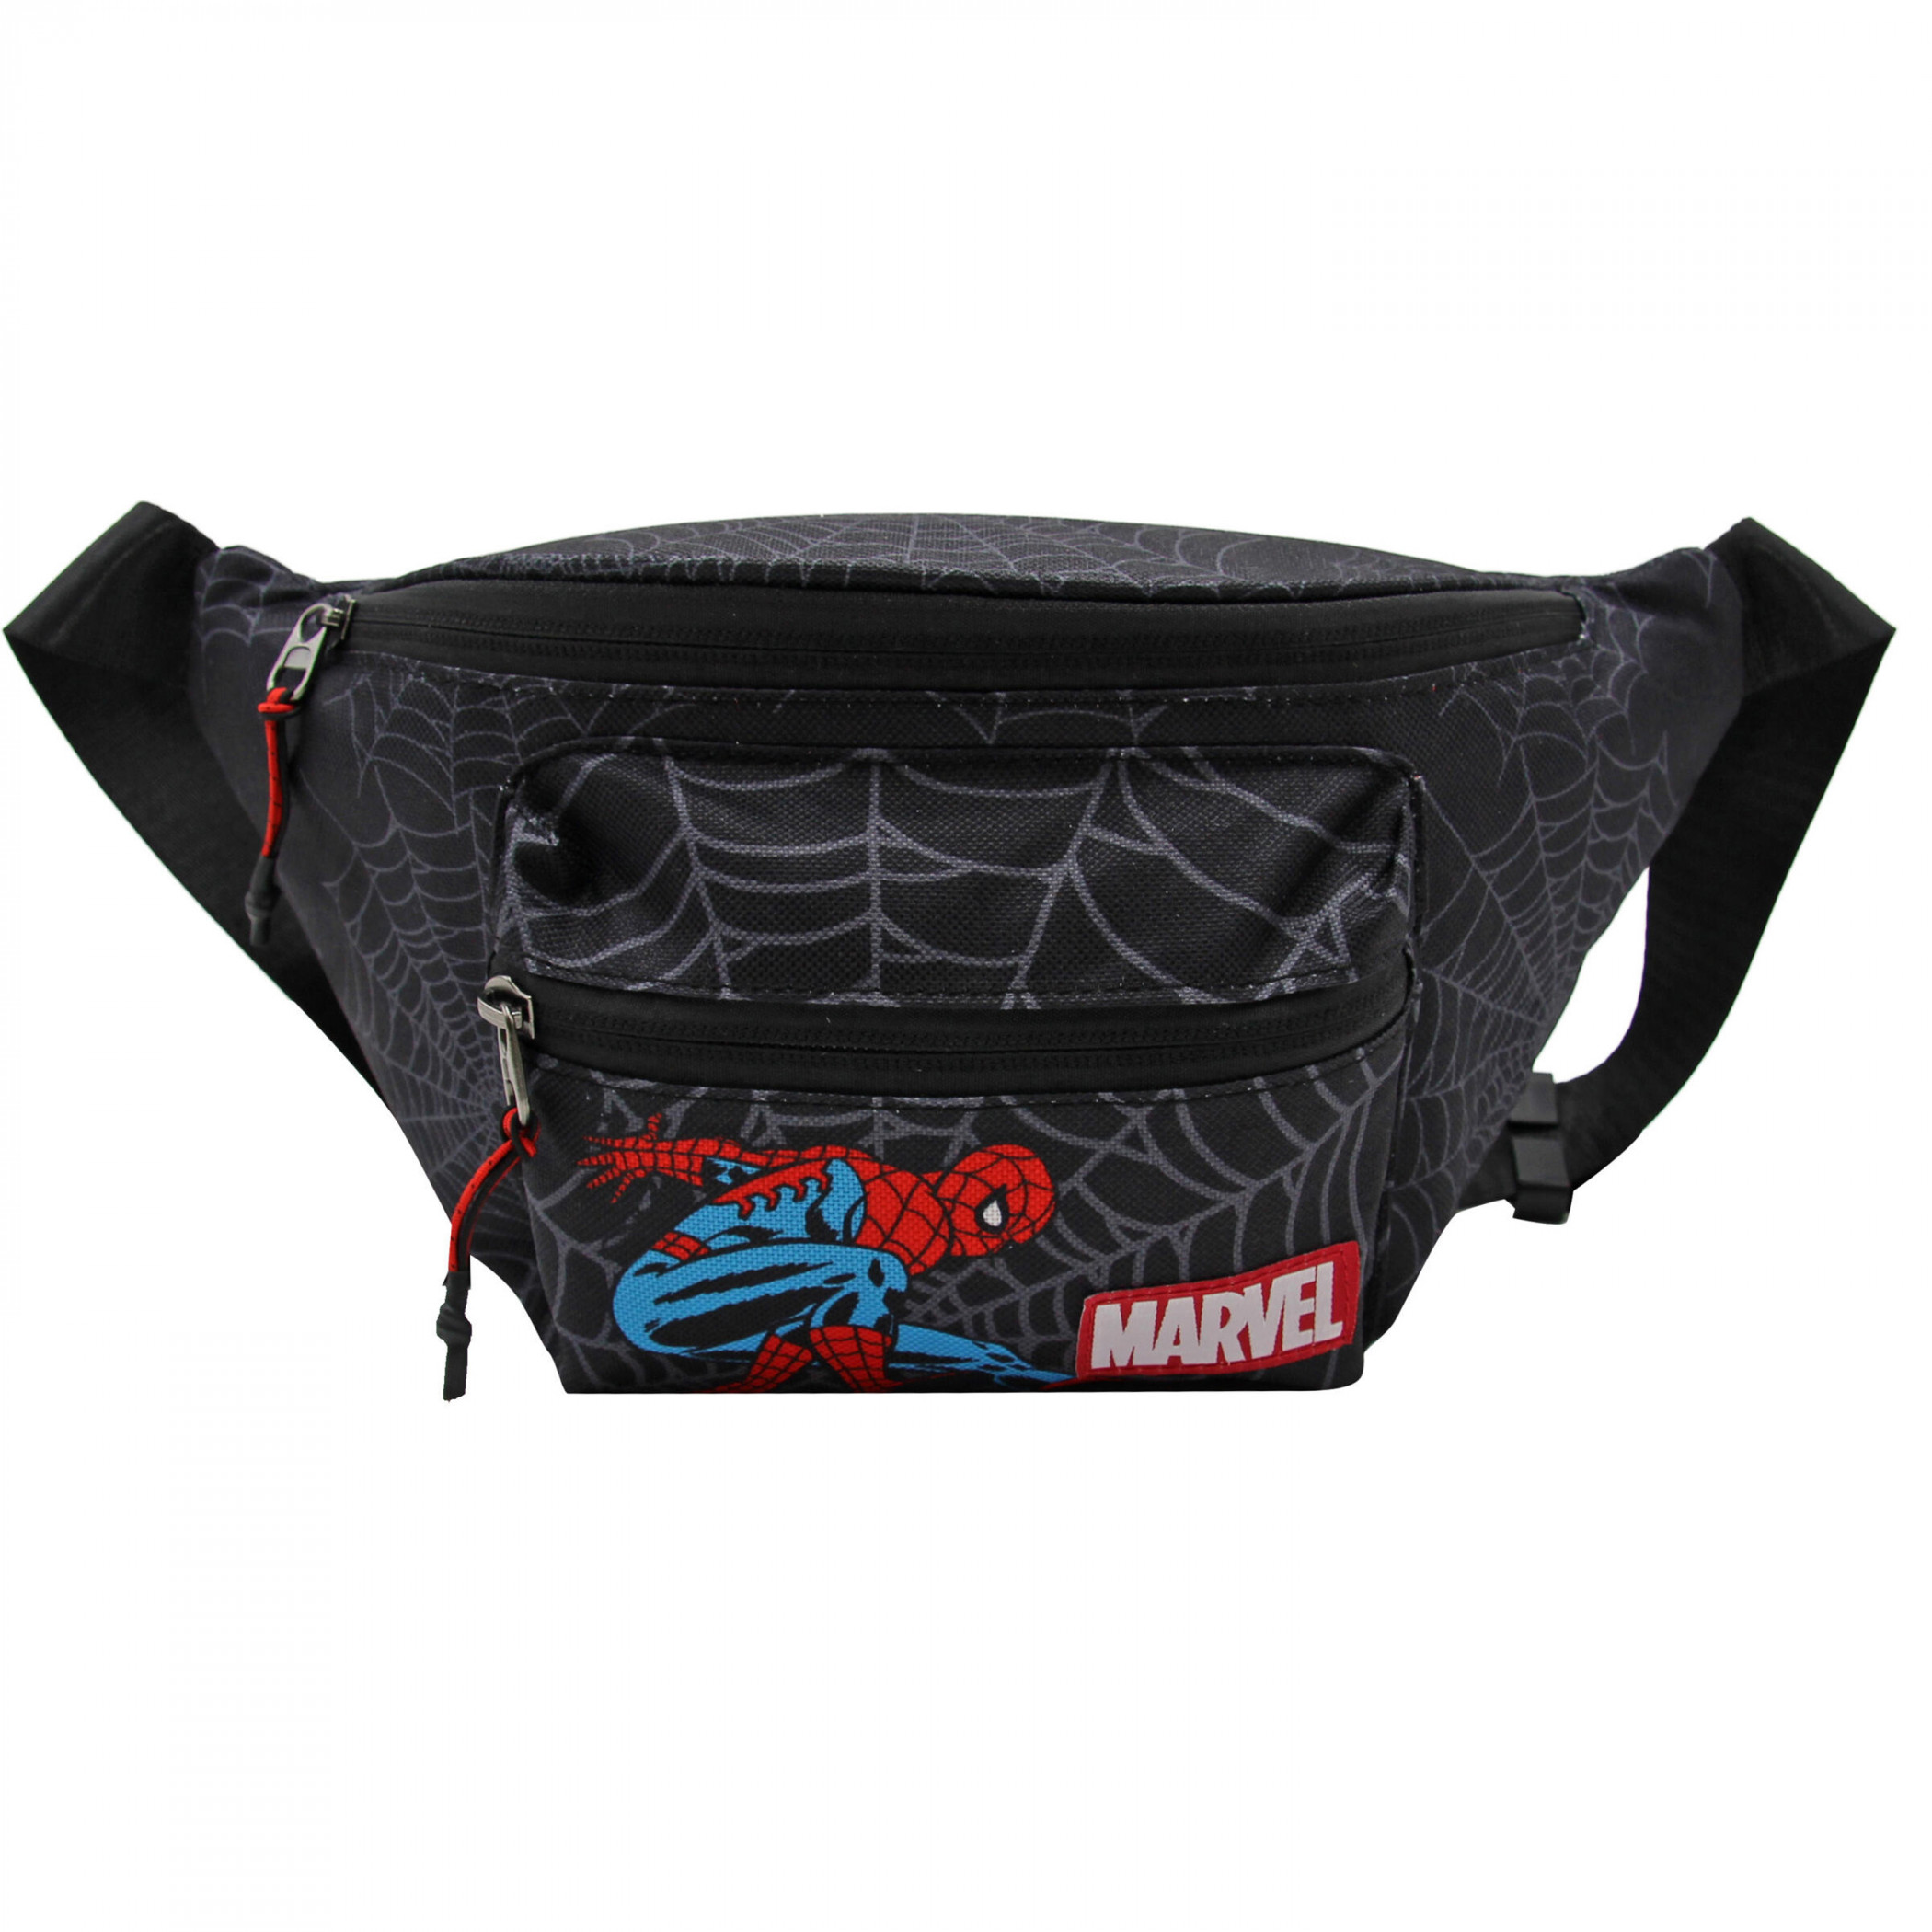 Spider-Man Jumping Through The Webs Action Waist Pack